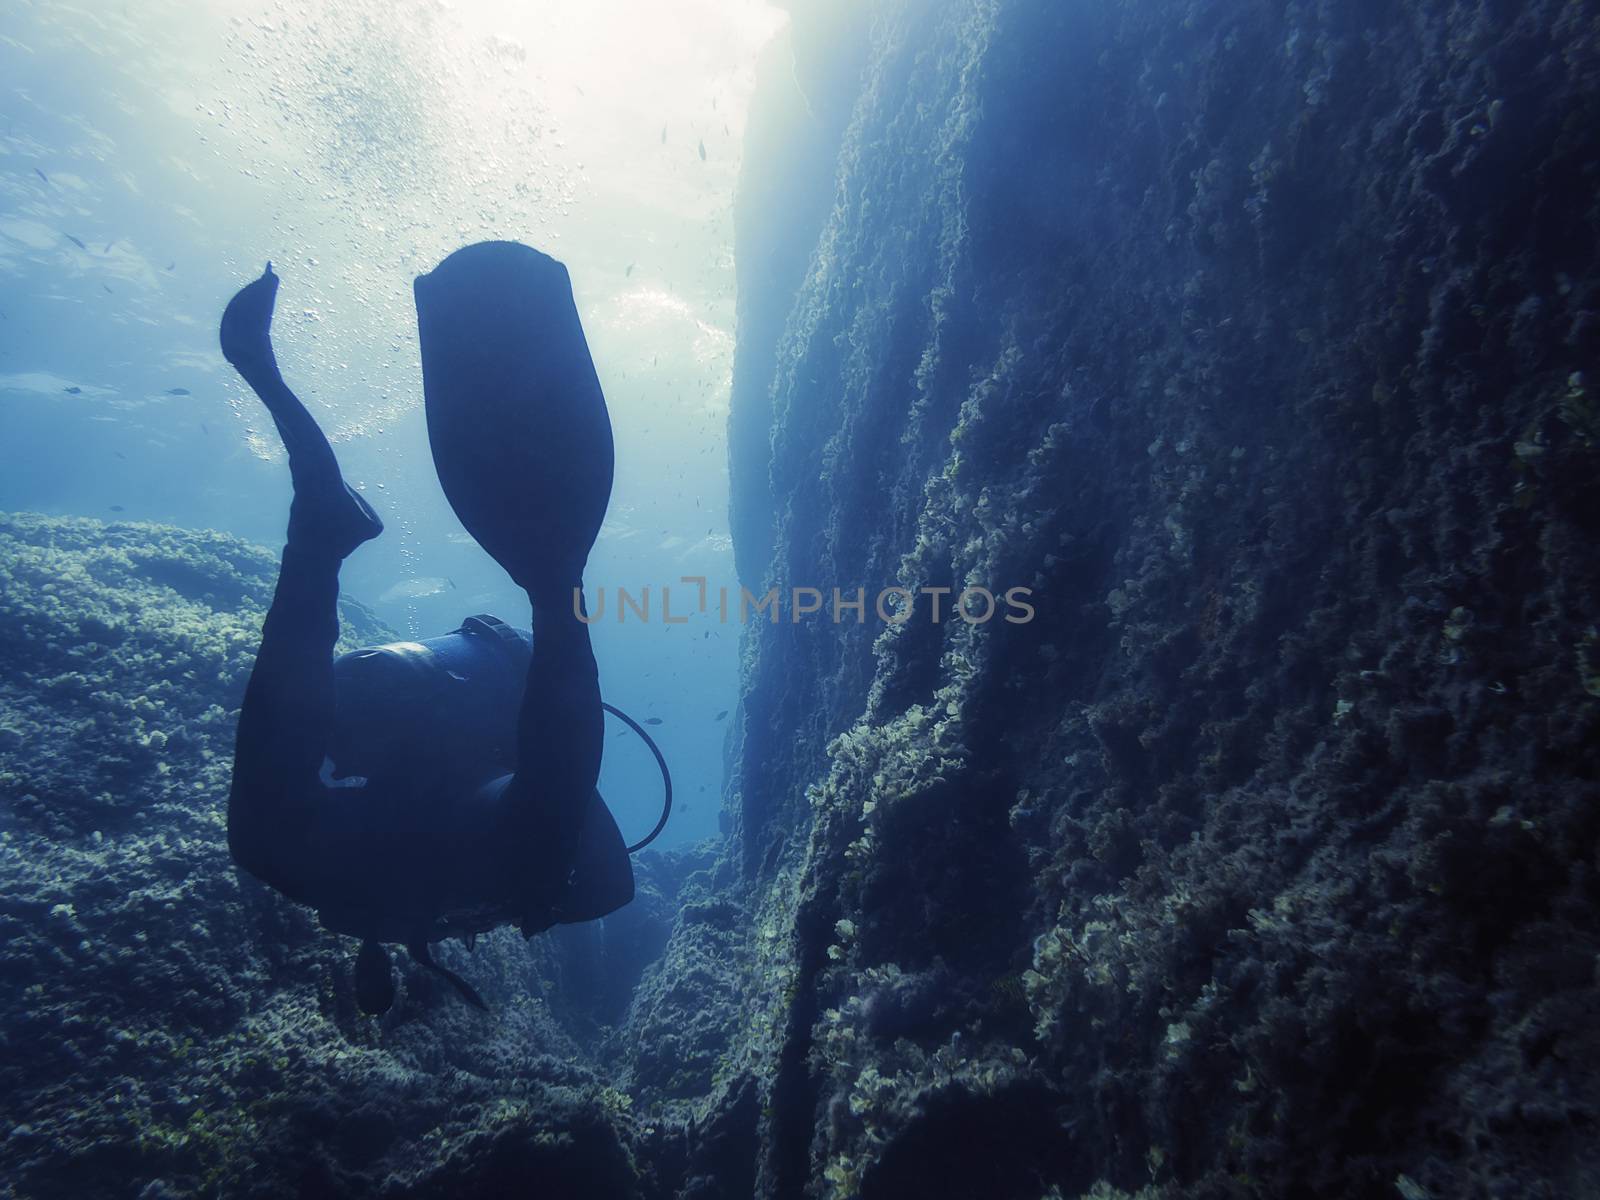 a person dive through an underwater canyon on the seabed, the bubbles and fins of the diver are silhouetted against the reflection of the golden sun on the surface and gently illuminate the dark rocks